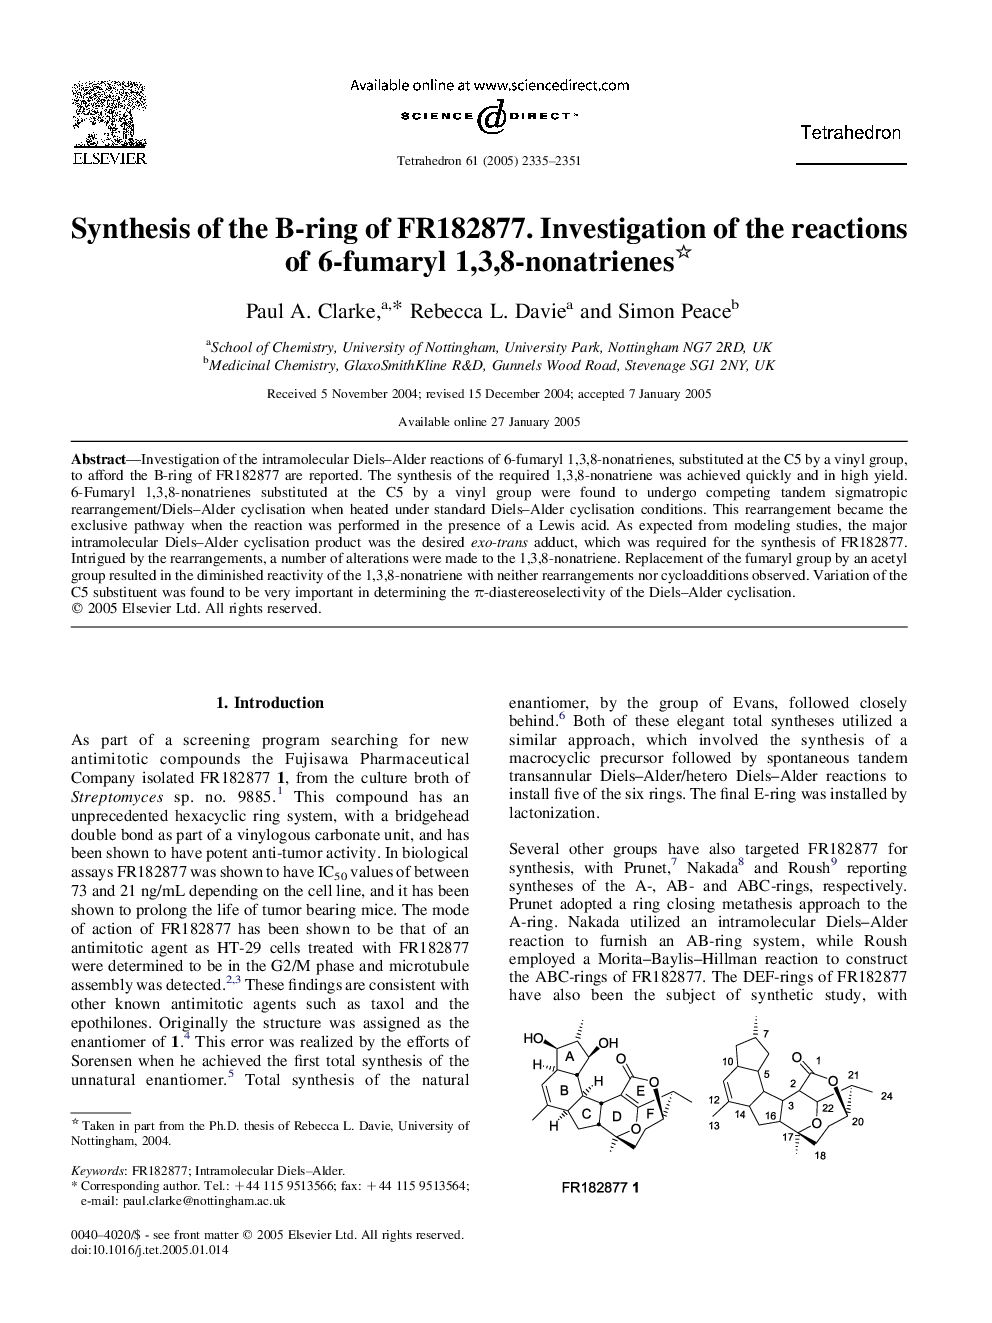 Synthesis of the B-ring of FR182877. Investigation of the reactions of 6-fumaryl 1,3,8-nonatrienes